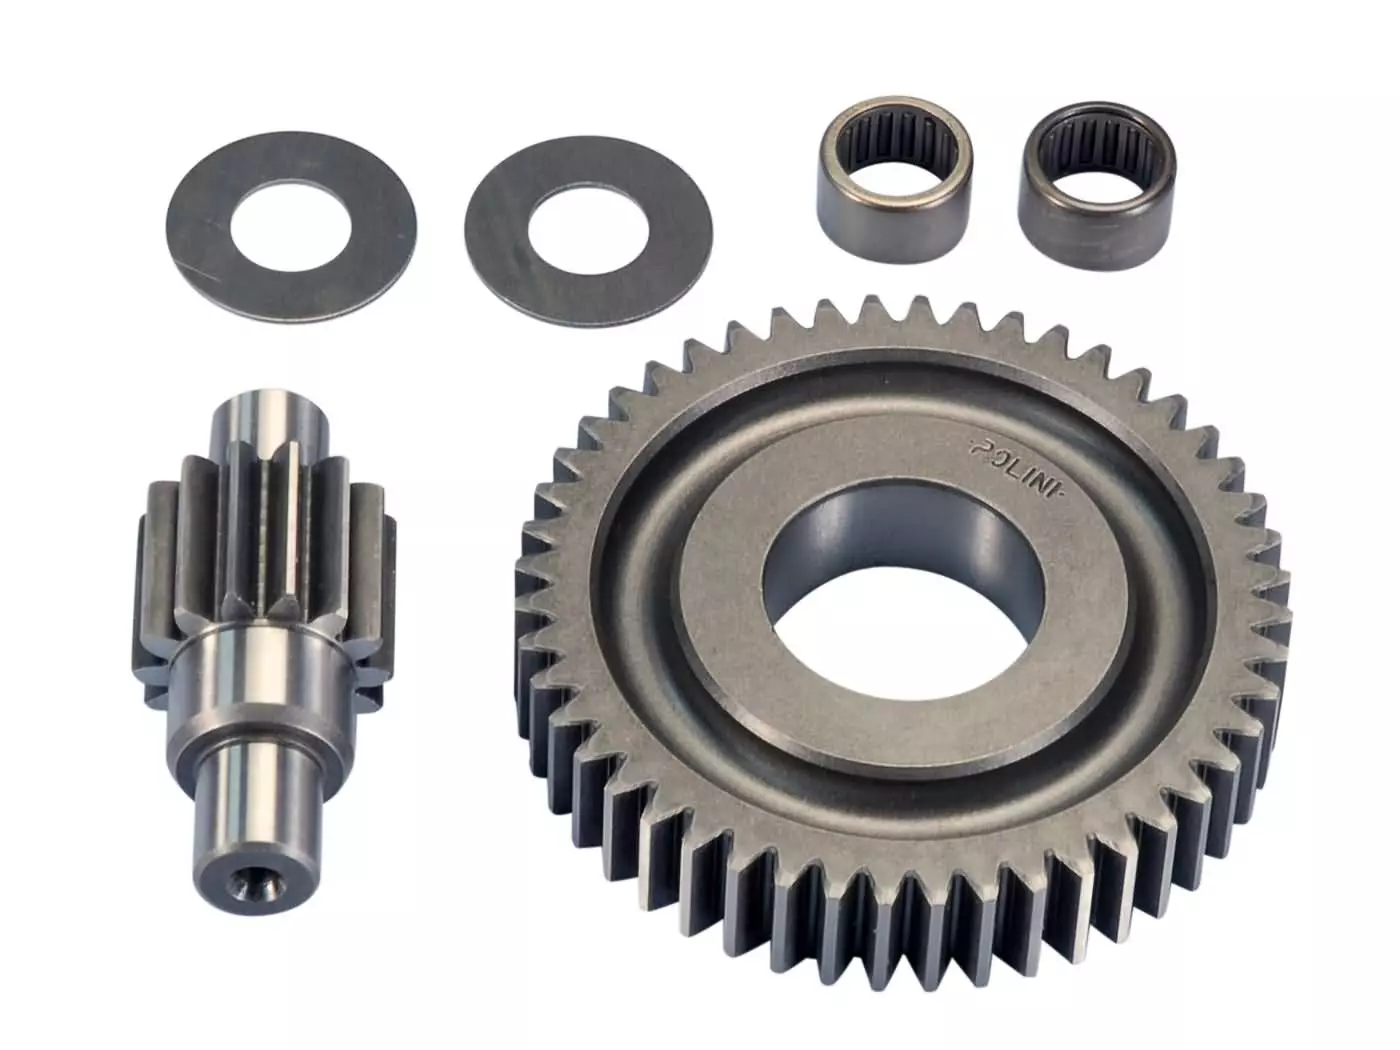 Secondary Transmission Gear Up Kit Polini 14/48 17.7mm For Piaggio 50 2T 1999